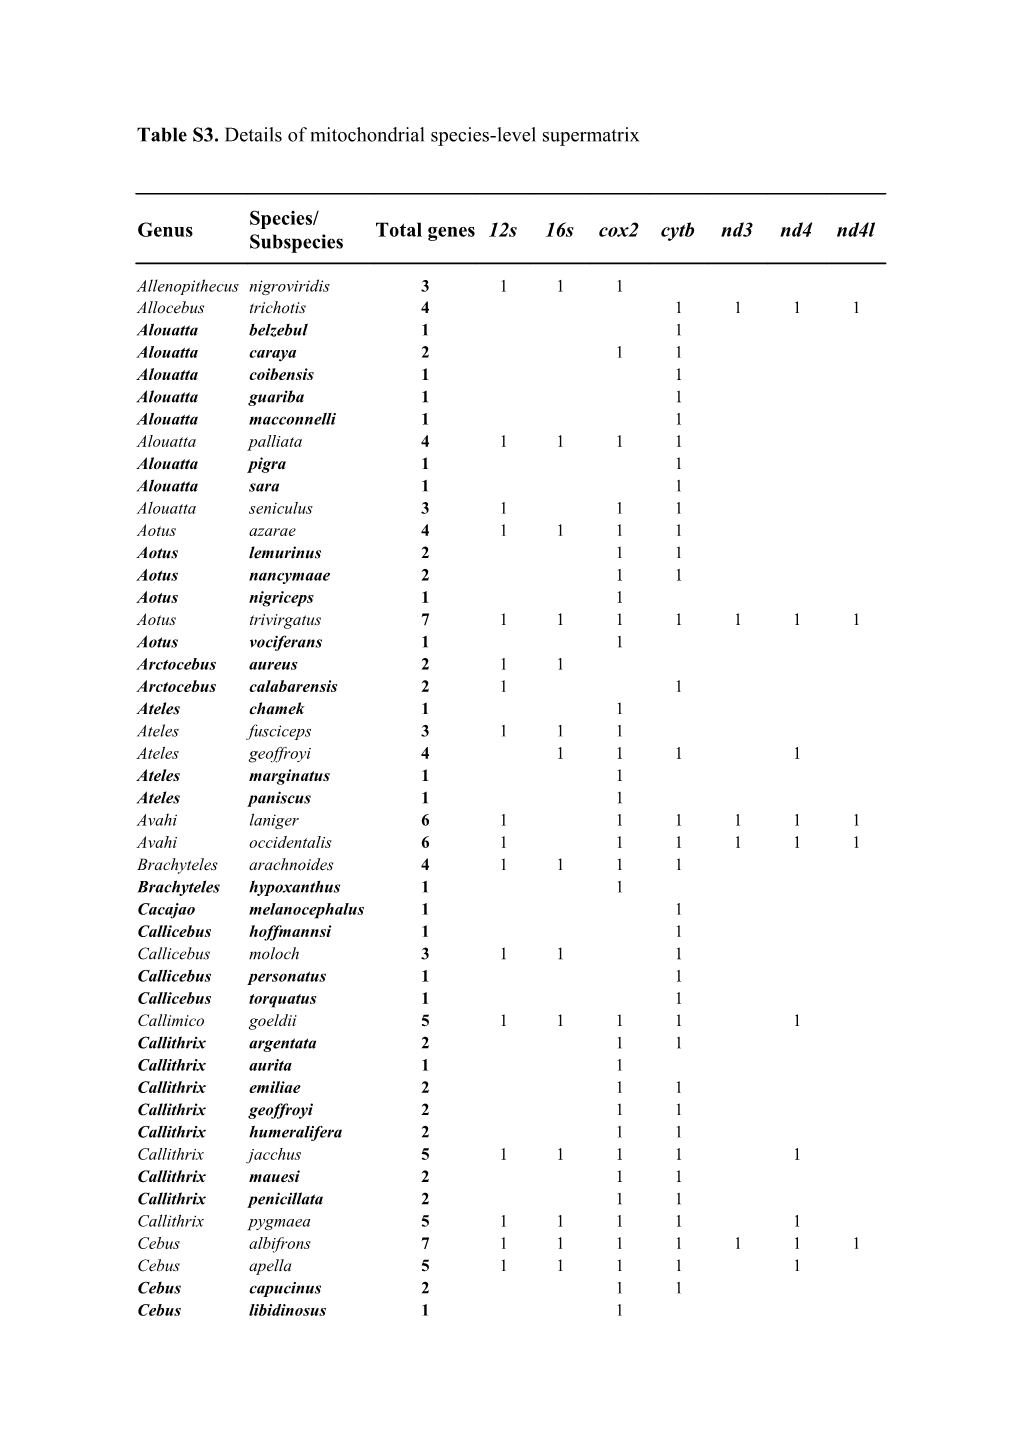 Table S3. Details of Mitochondrial Species-Level Supermatrix